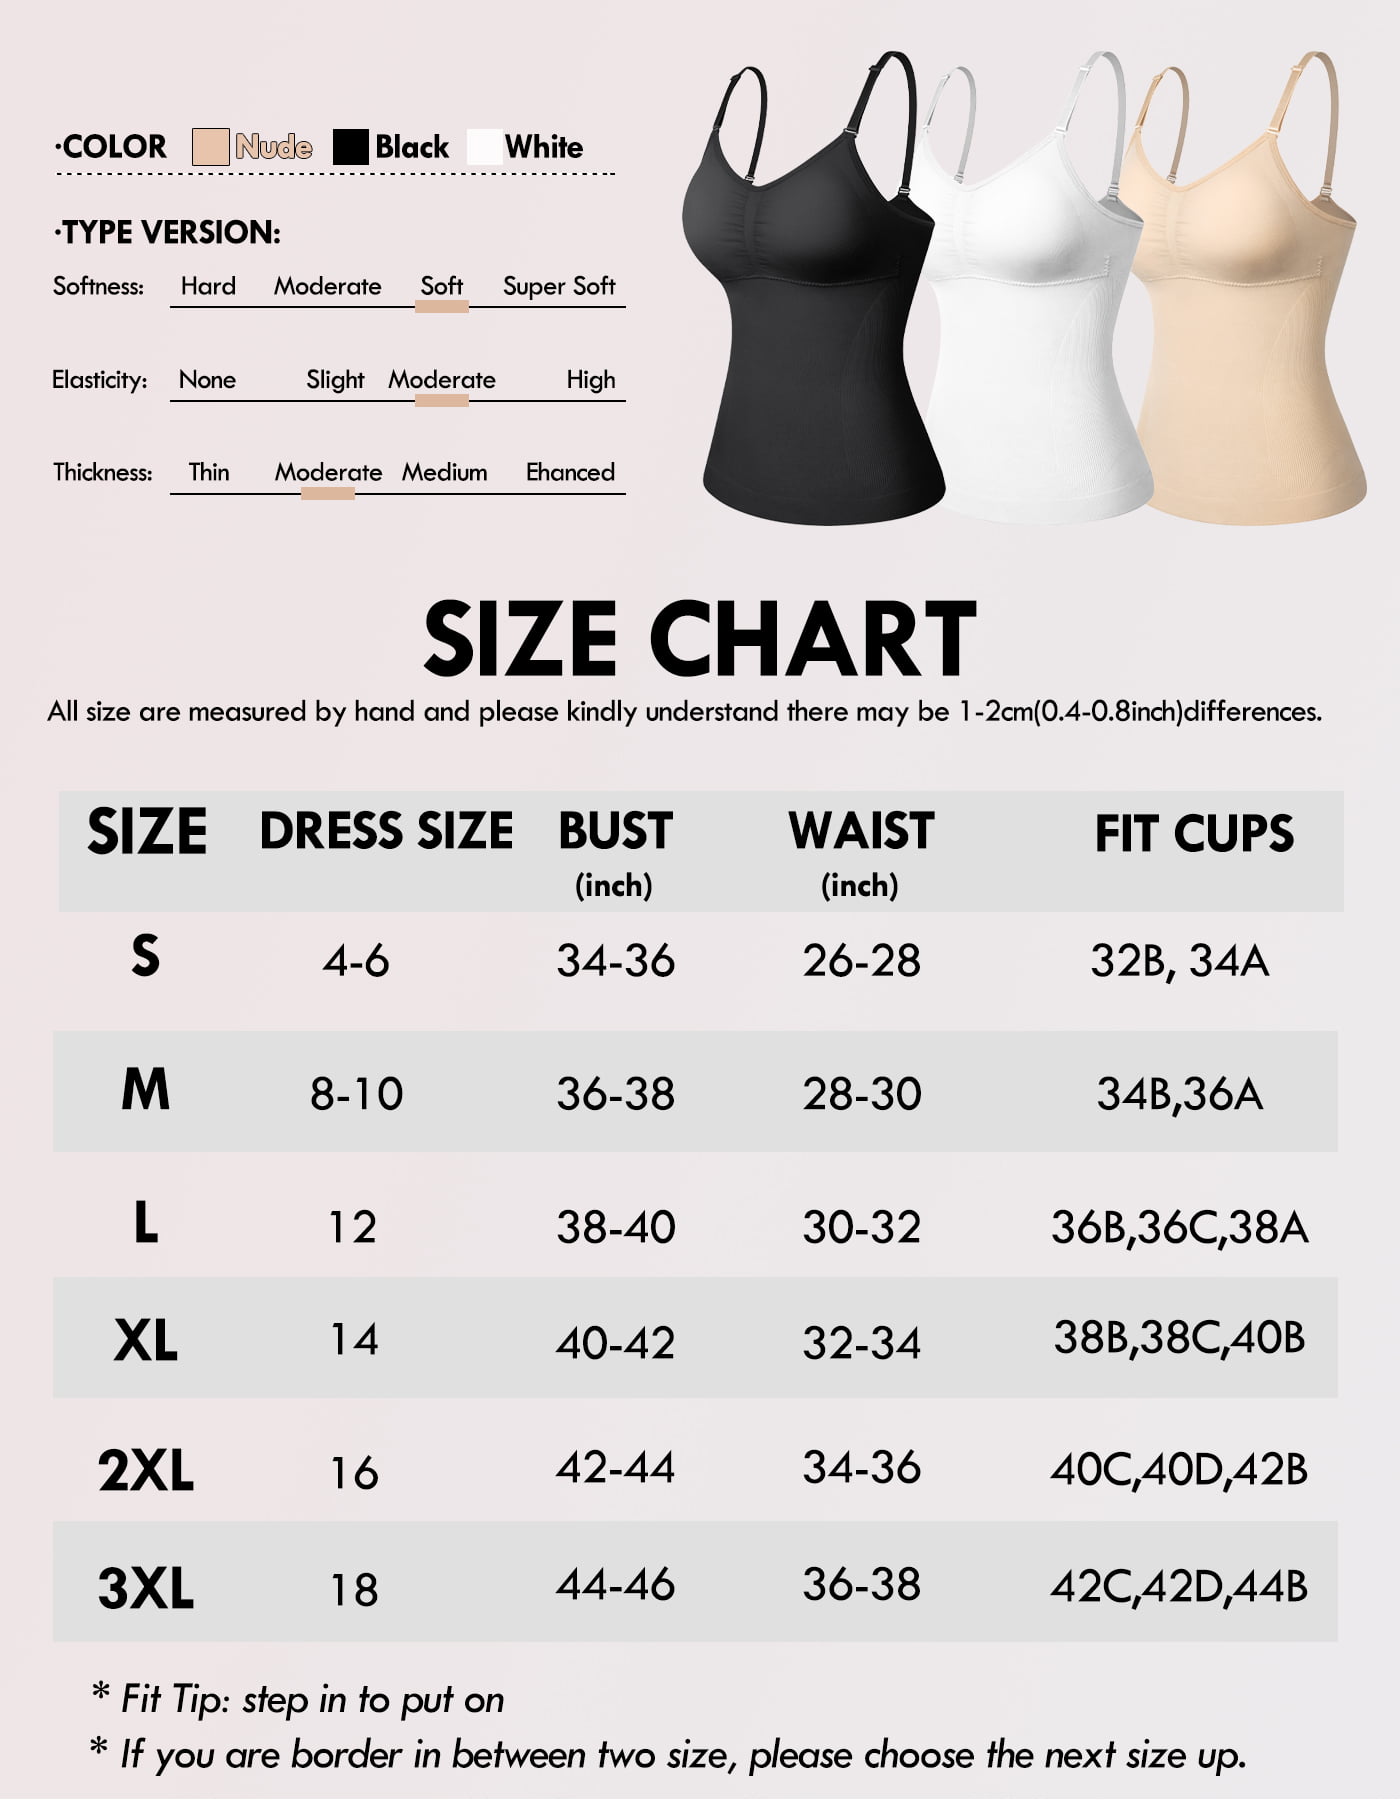 Underwear clearance under $3.00 Bras For Couples Kinky Women'S Camisole  Tops With Built In Bra Neck Vest Padded Slim Fit Tank Tops 